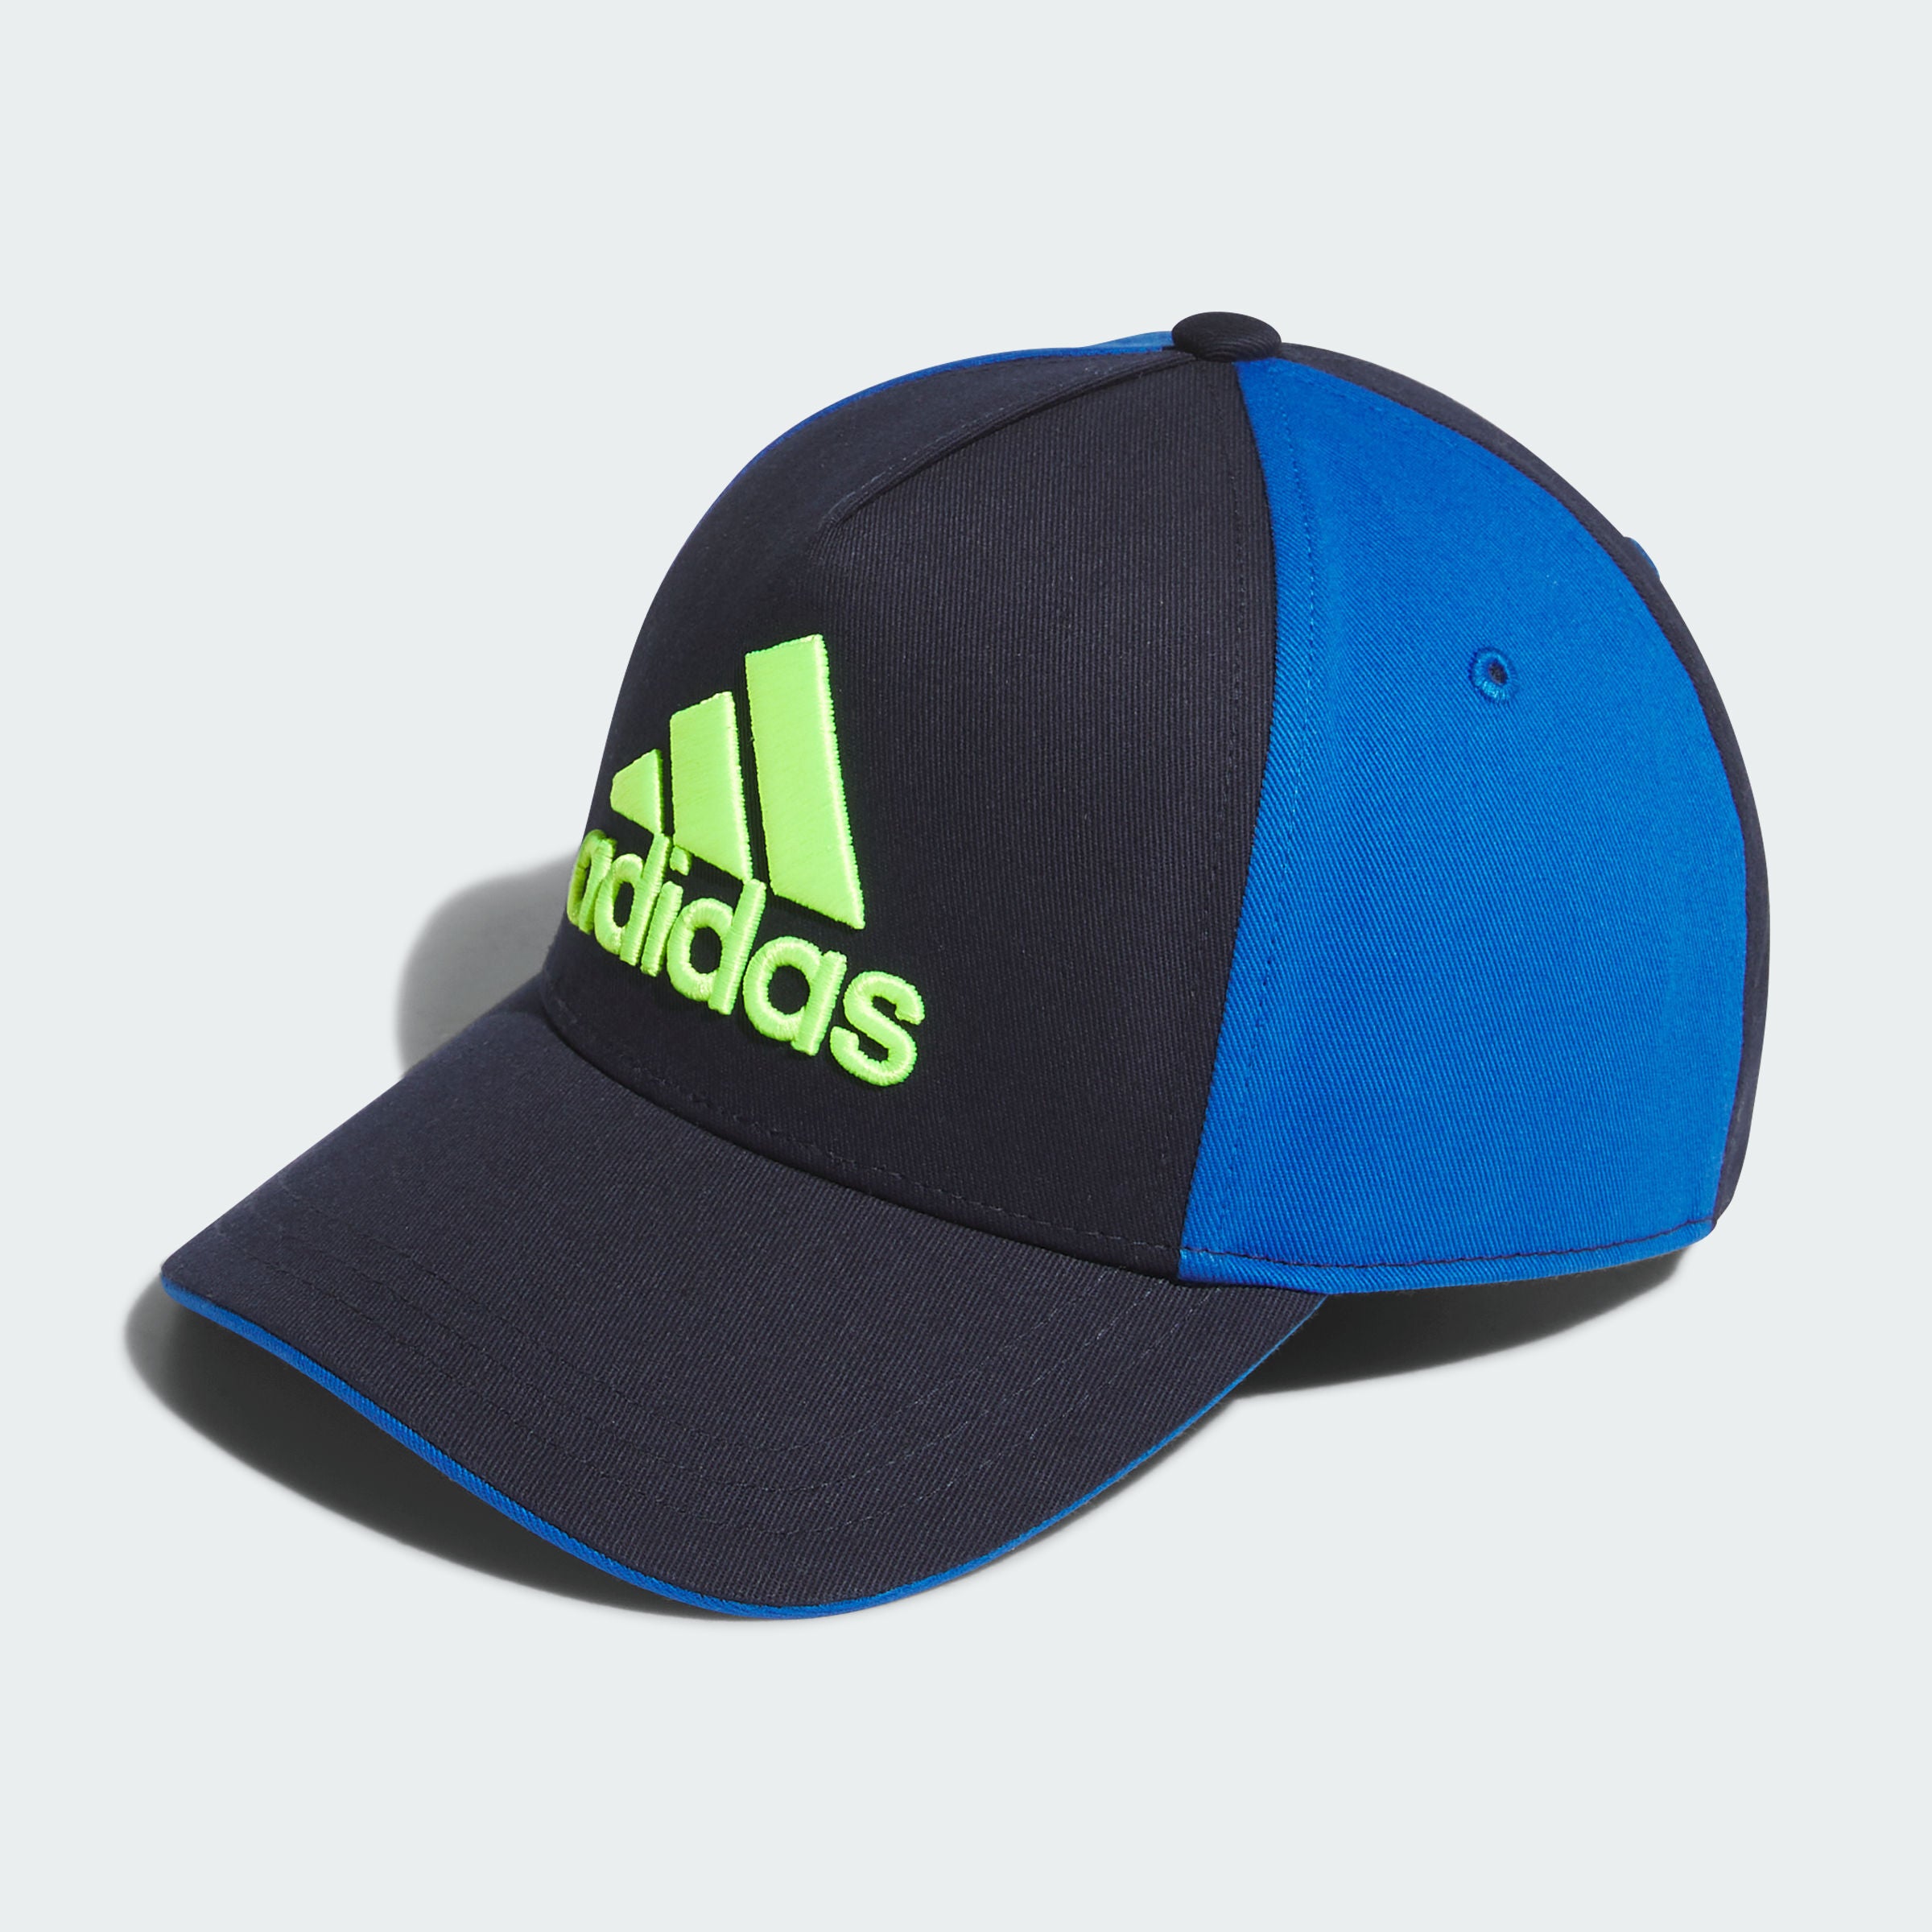 ACC, Adidas, CCA - ACCHW,  hat,open for kids